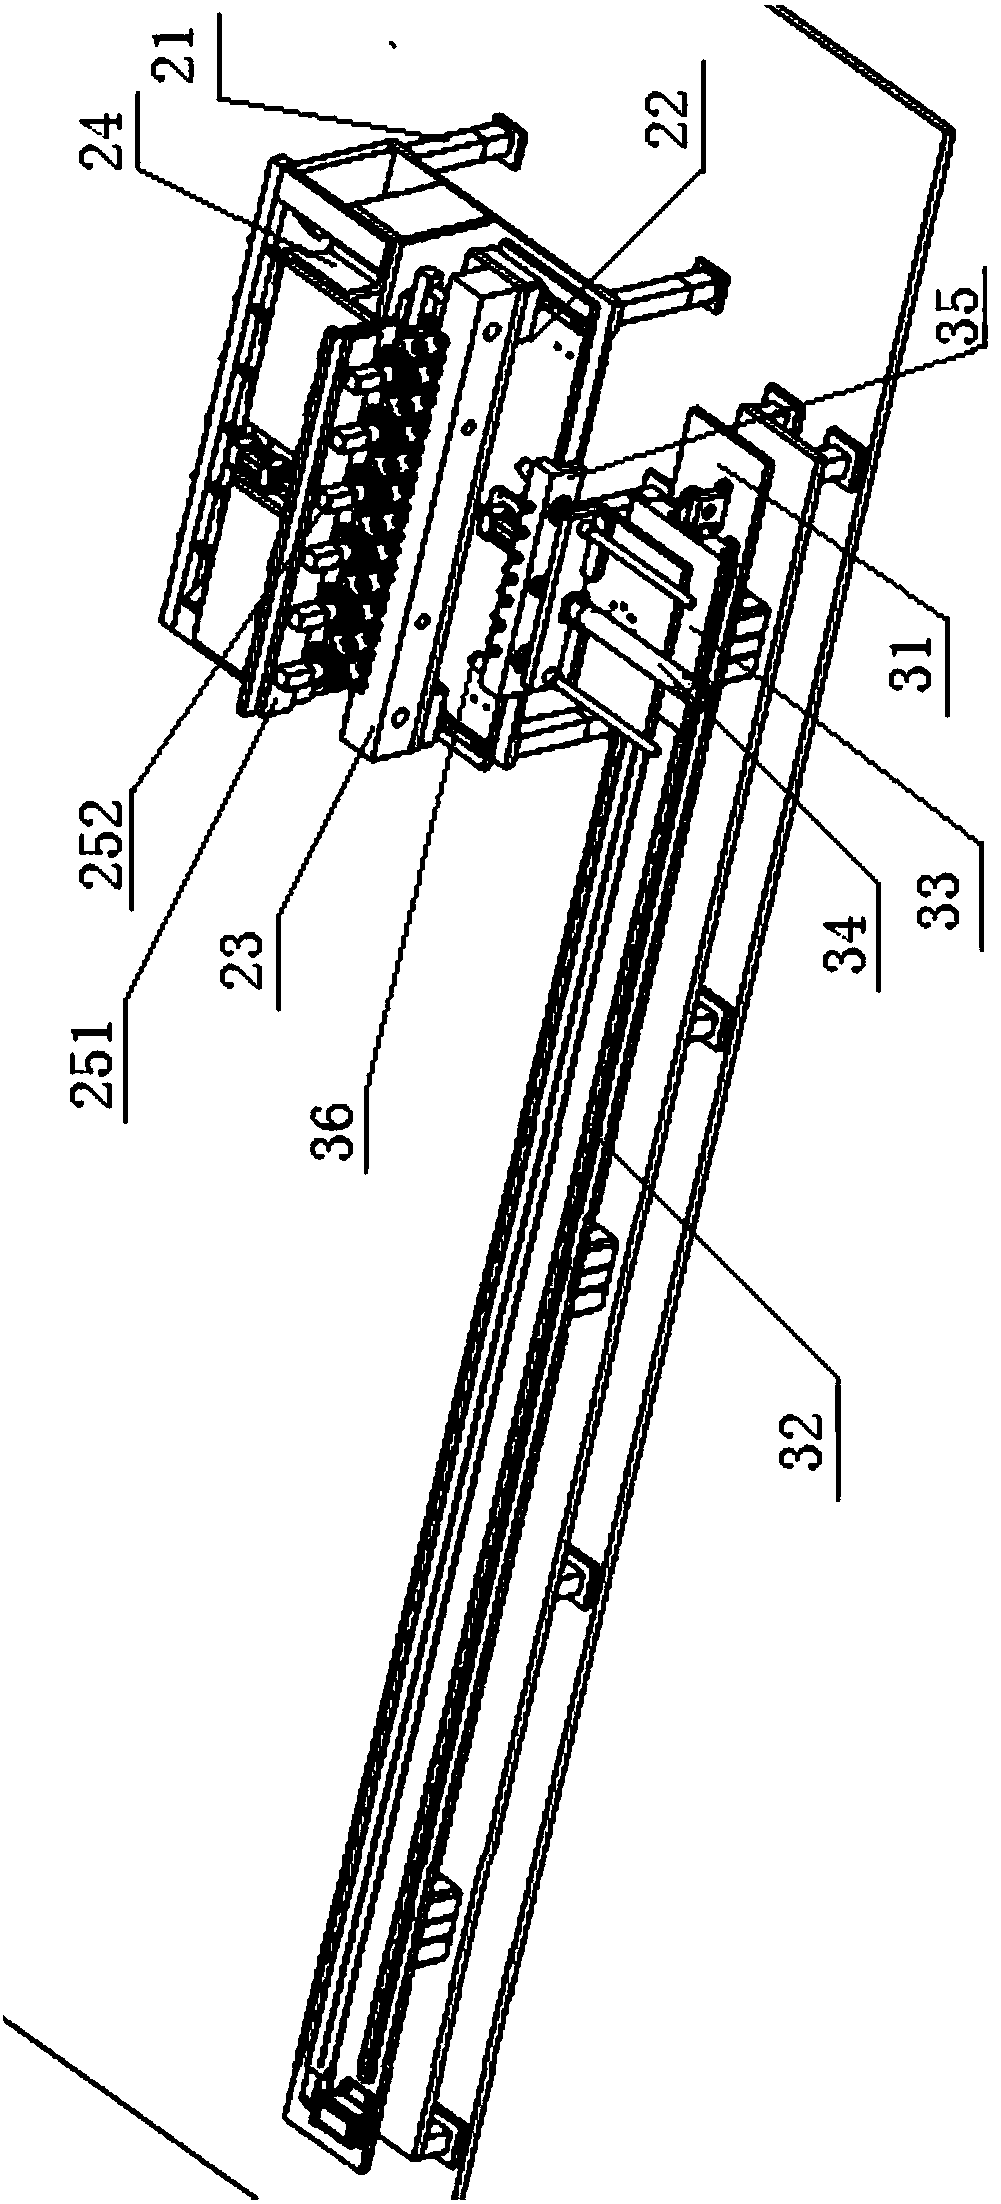 Liquid injecting and standing device for cylindrical lithium-ion batteries